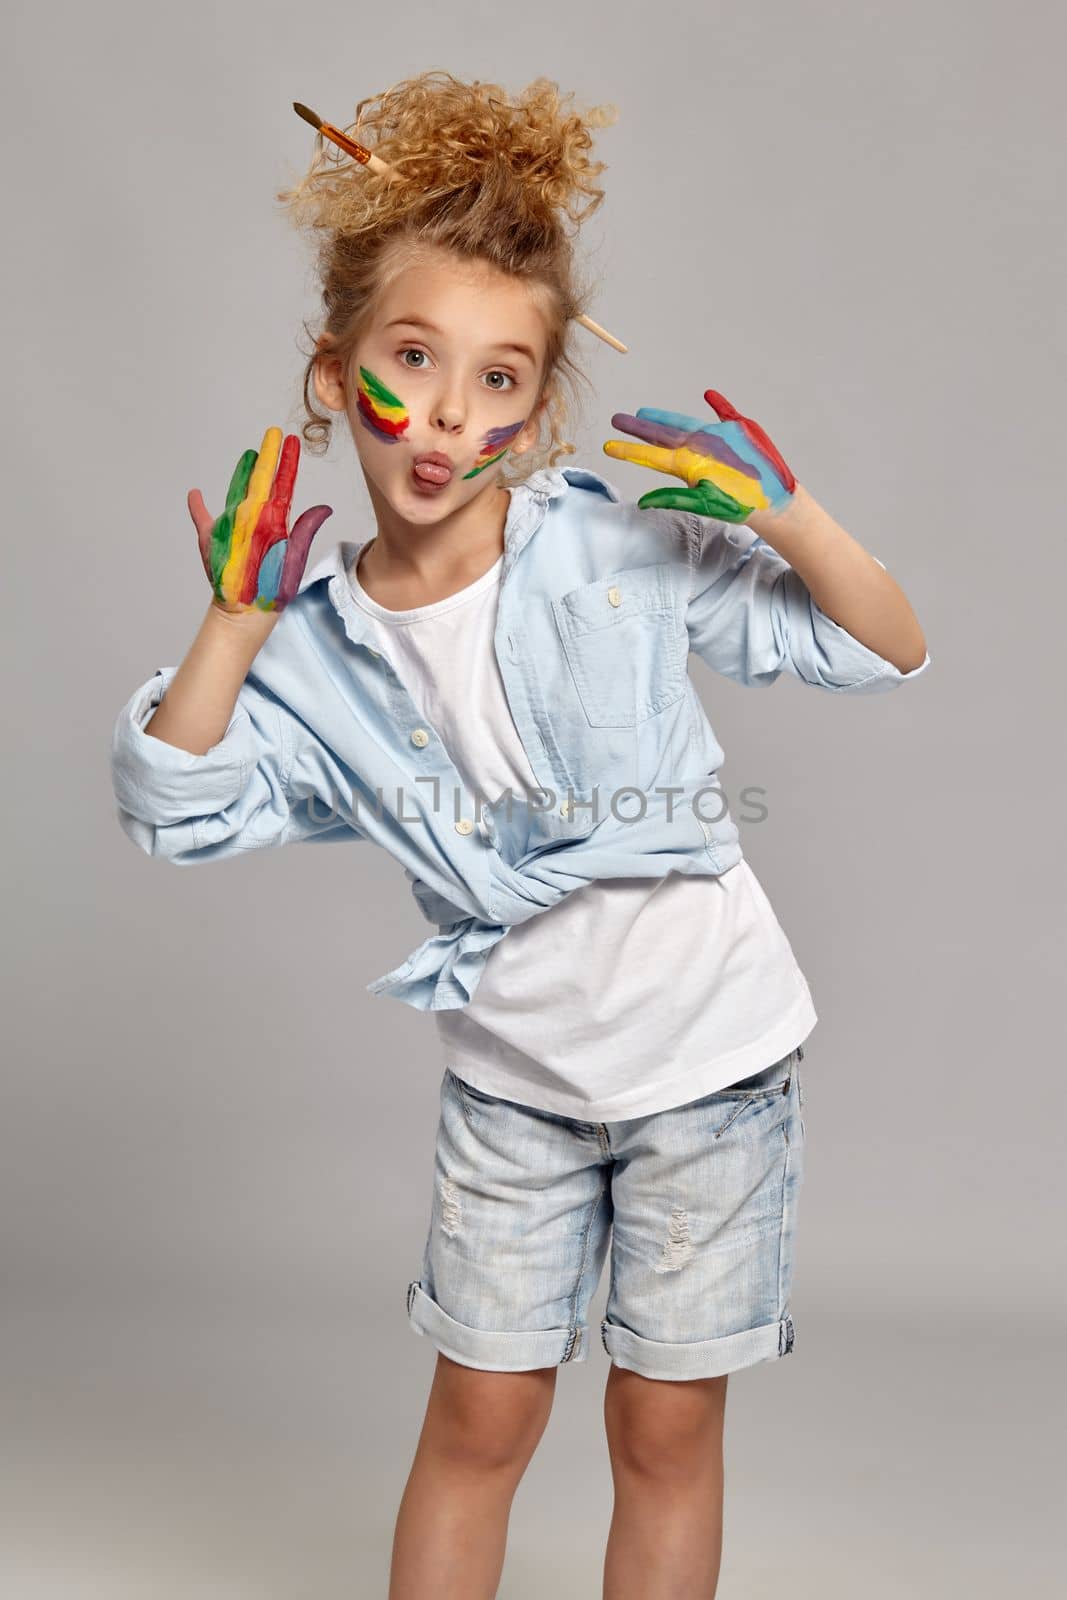 Nice kid having a brush in her chic haircut, wearing in a blue shirt and white t-shirt. She is posing with a painted arms and cheeks, looking at the camera and showing her tongue, on a gray background.